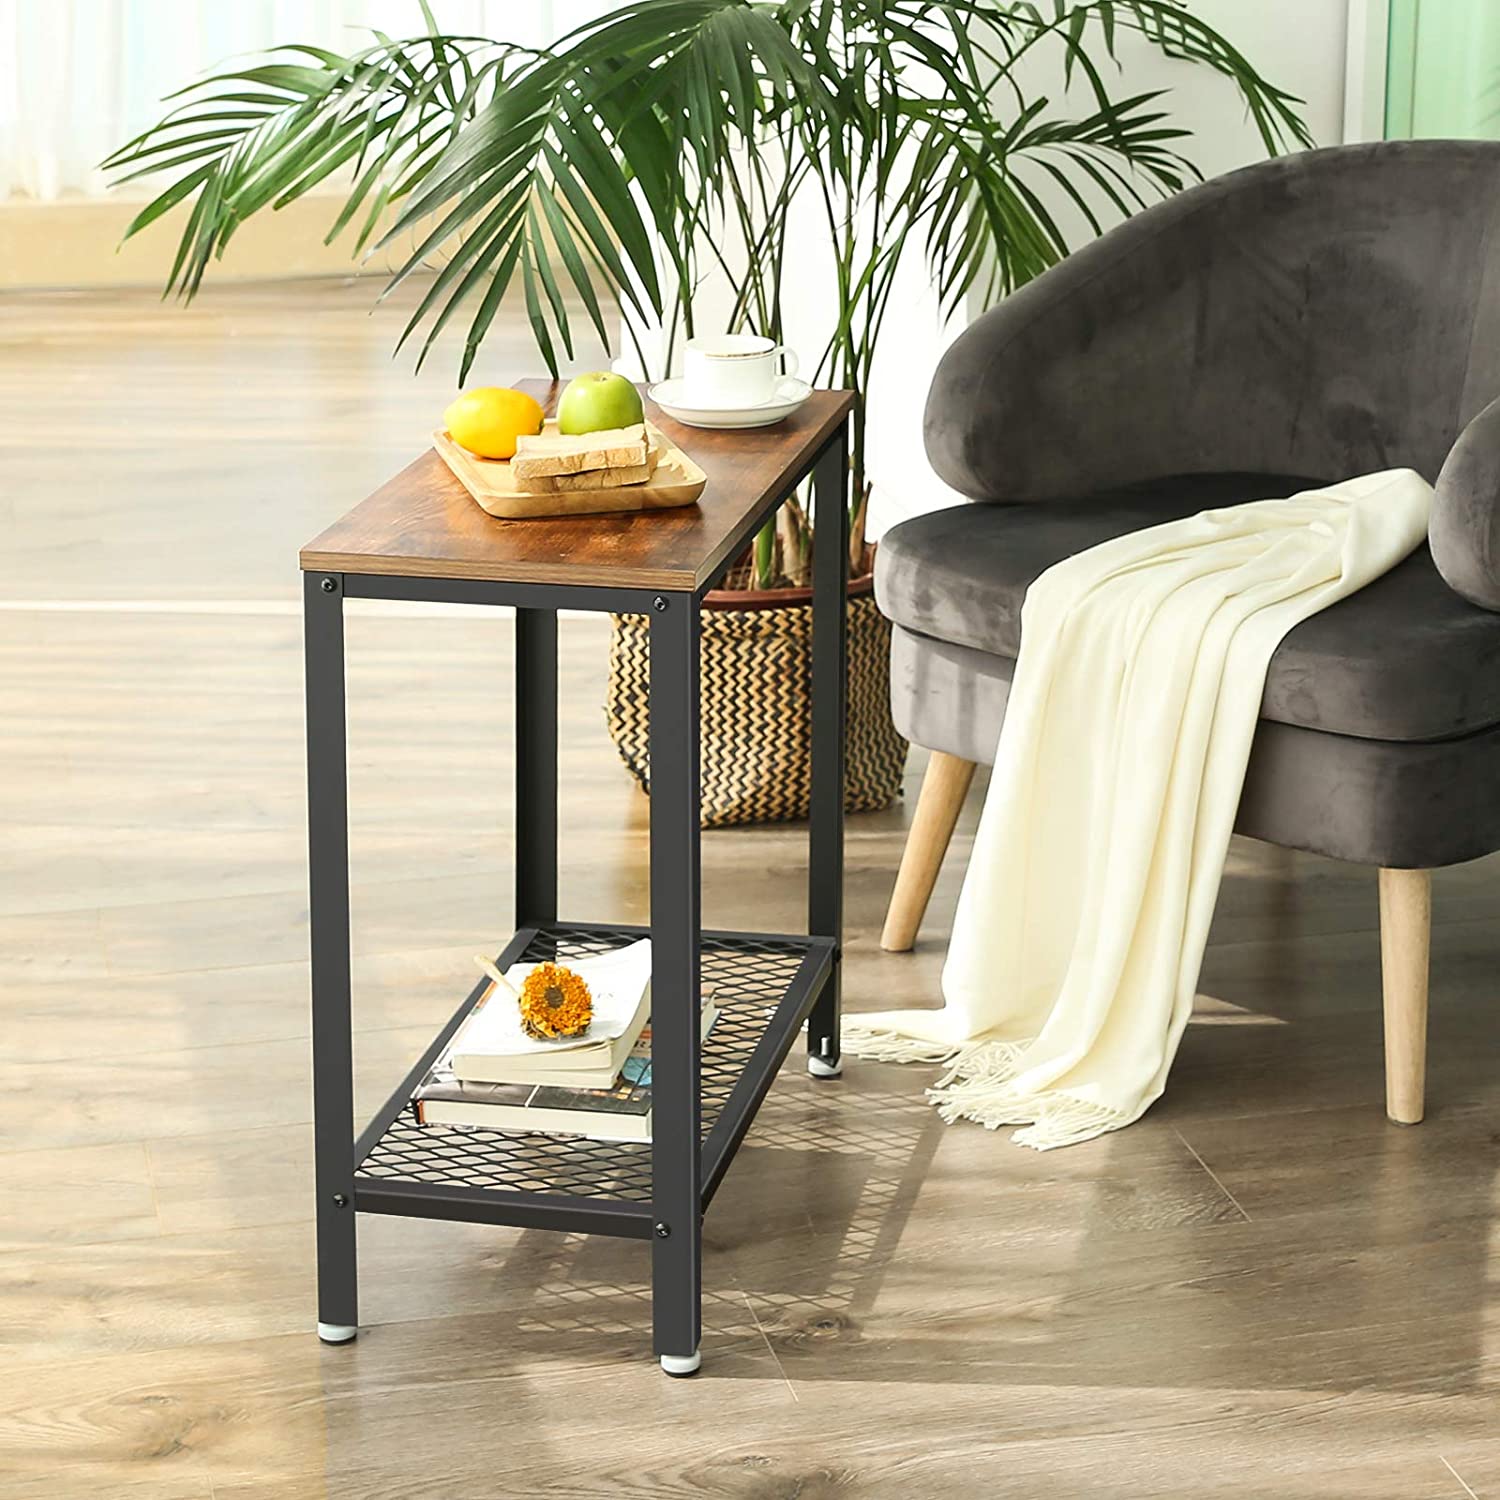 2-Tier Industrial Side Table With Mesh And Metal Frame Rustic Brown